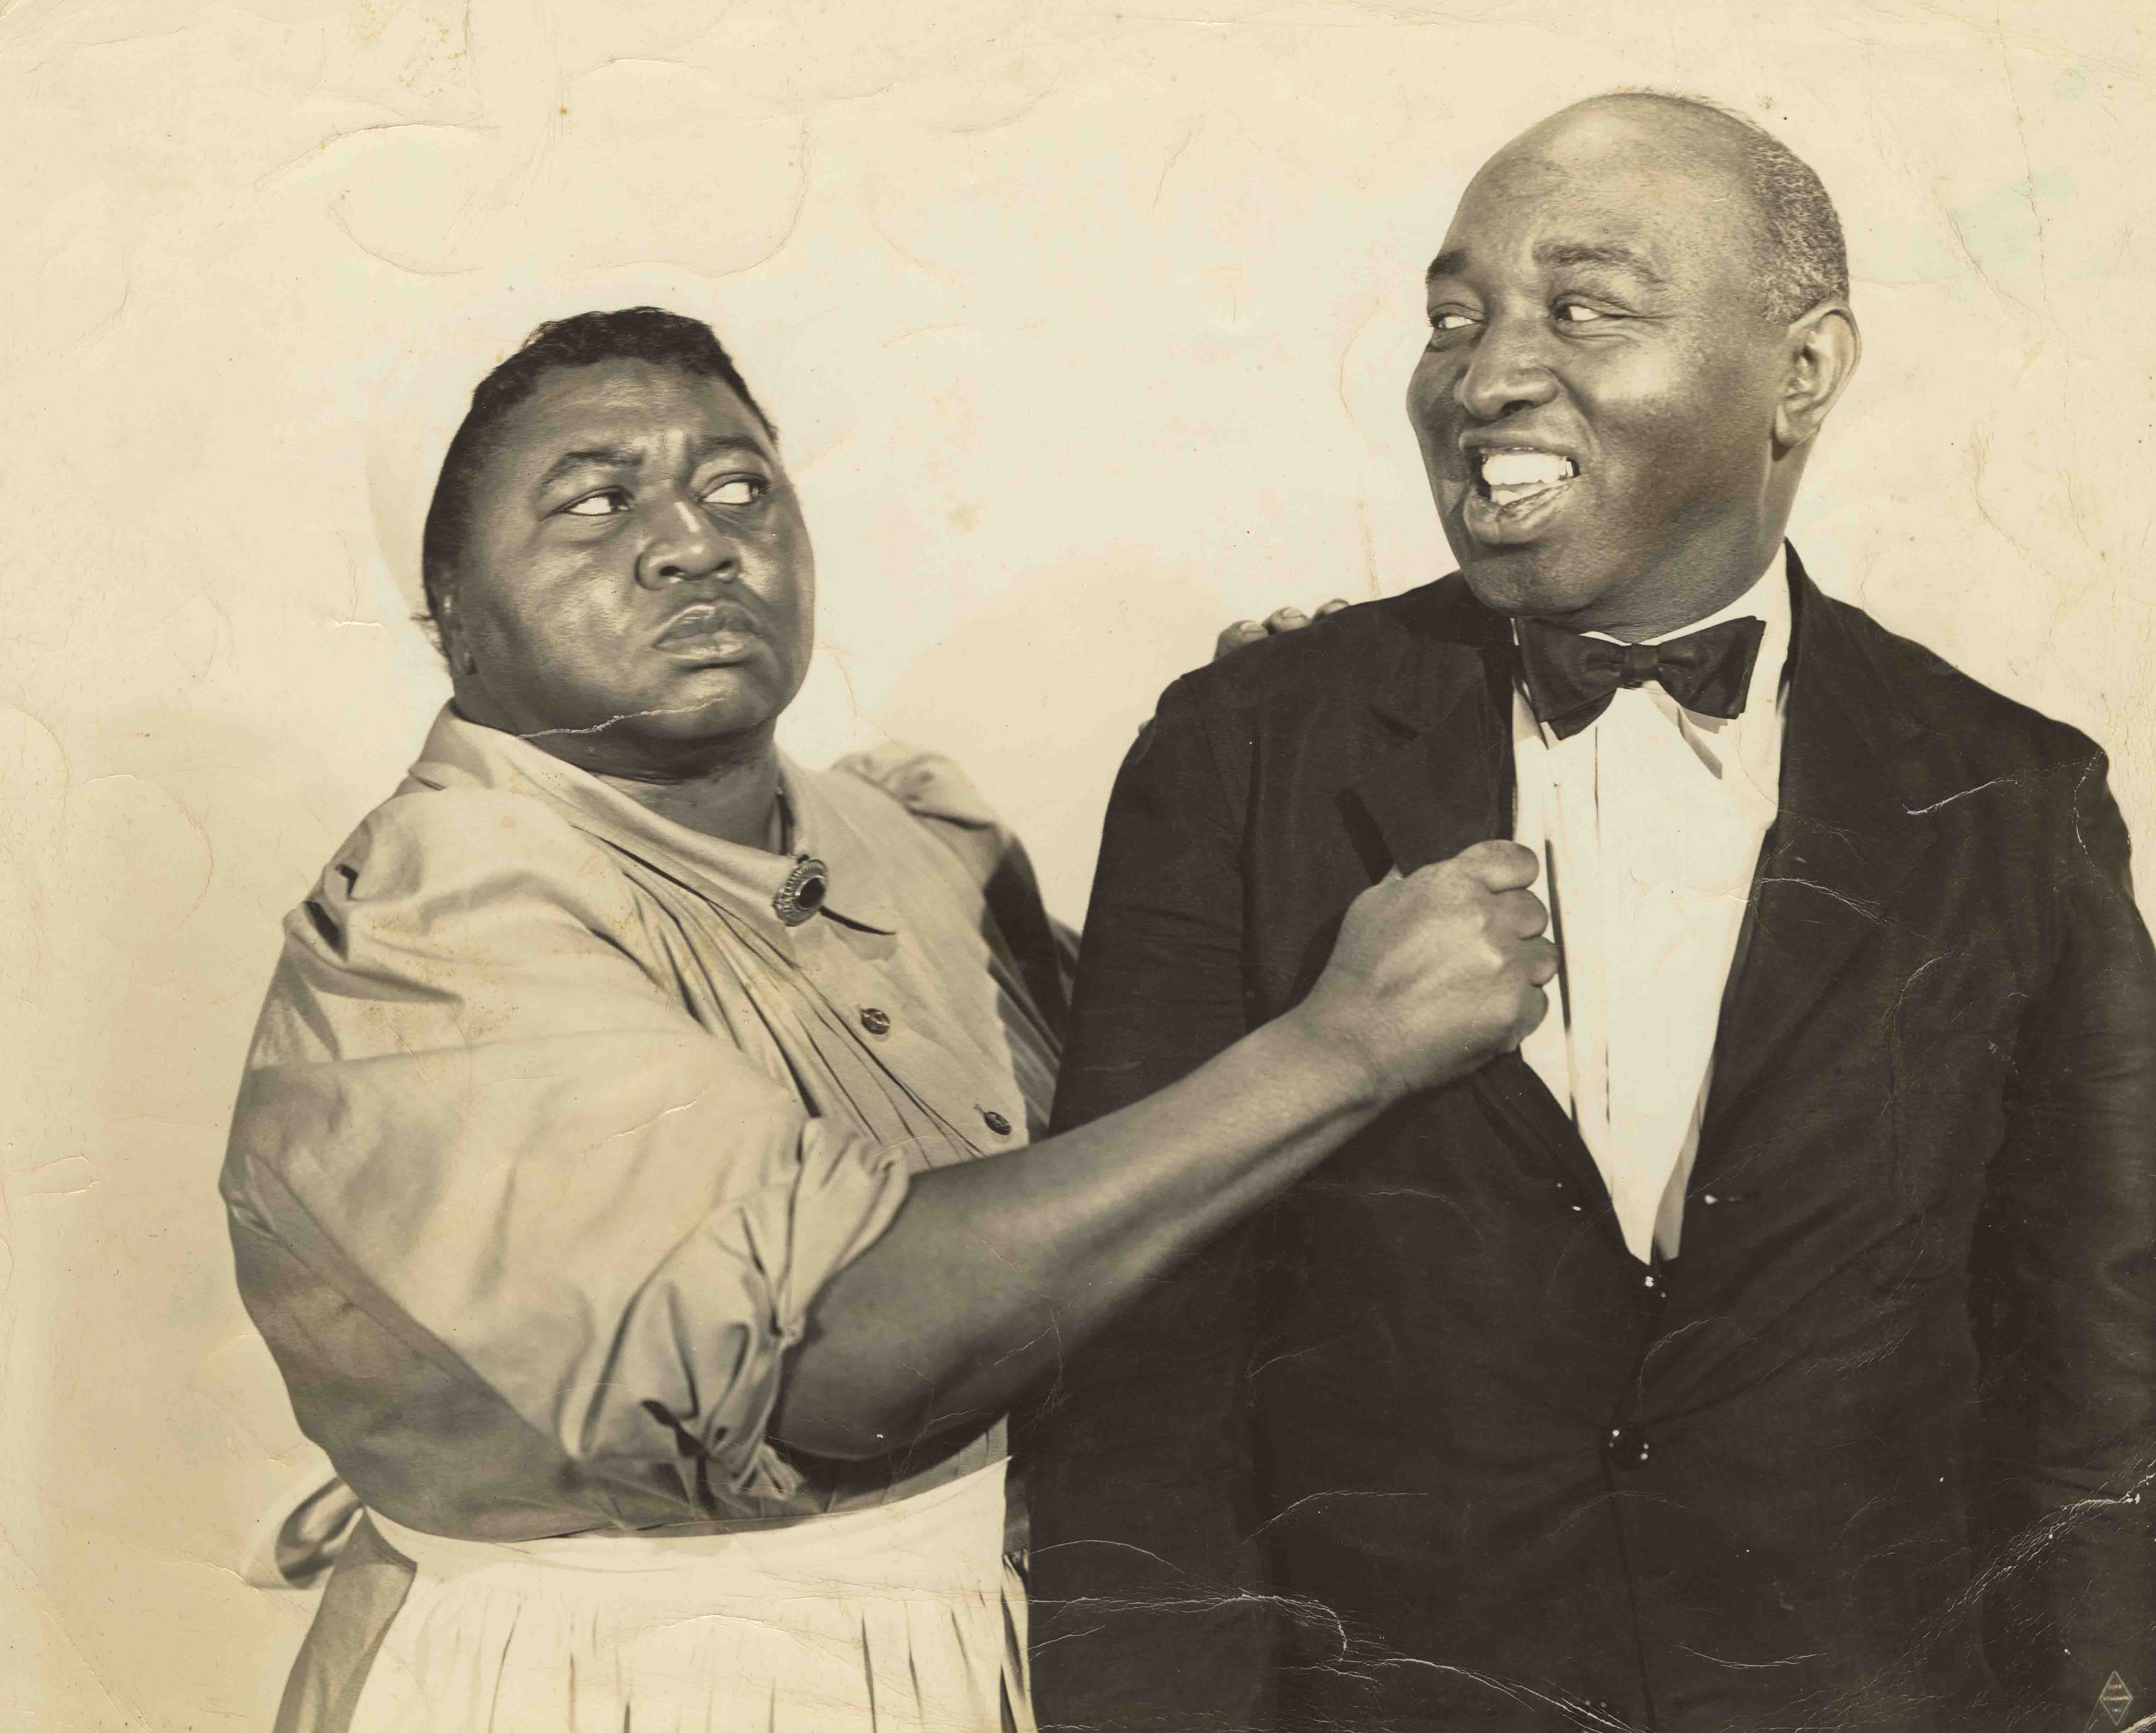 Hattie McDaniel and her brother Sam in The Great Lie (1941), publicity still. Courtesy Margaret Herrick Library.